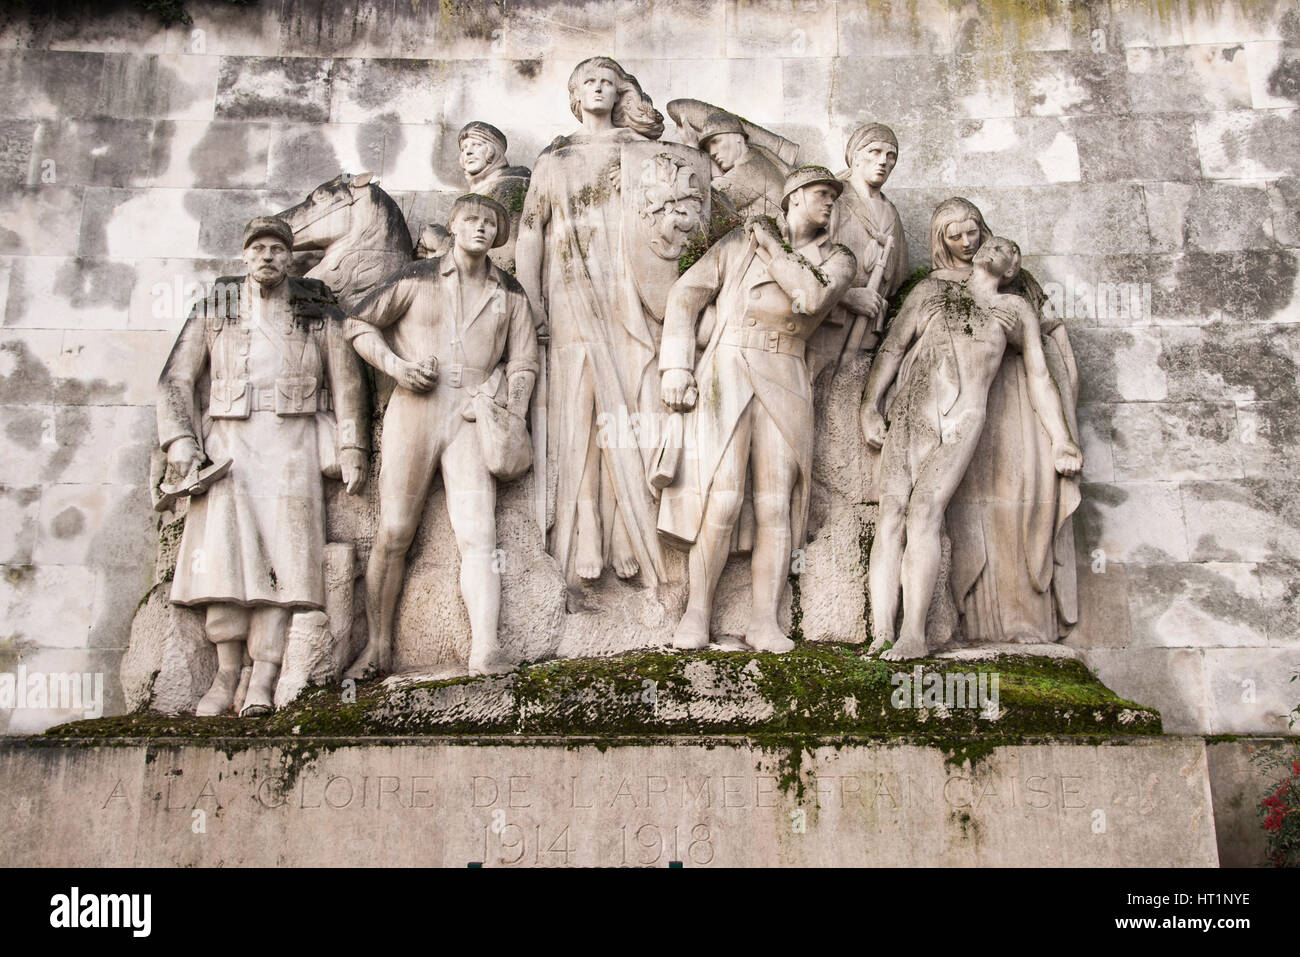 The First World War memorial statue on the wall of Passy Cemetery in Paris France. Stock Photo